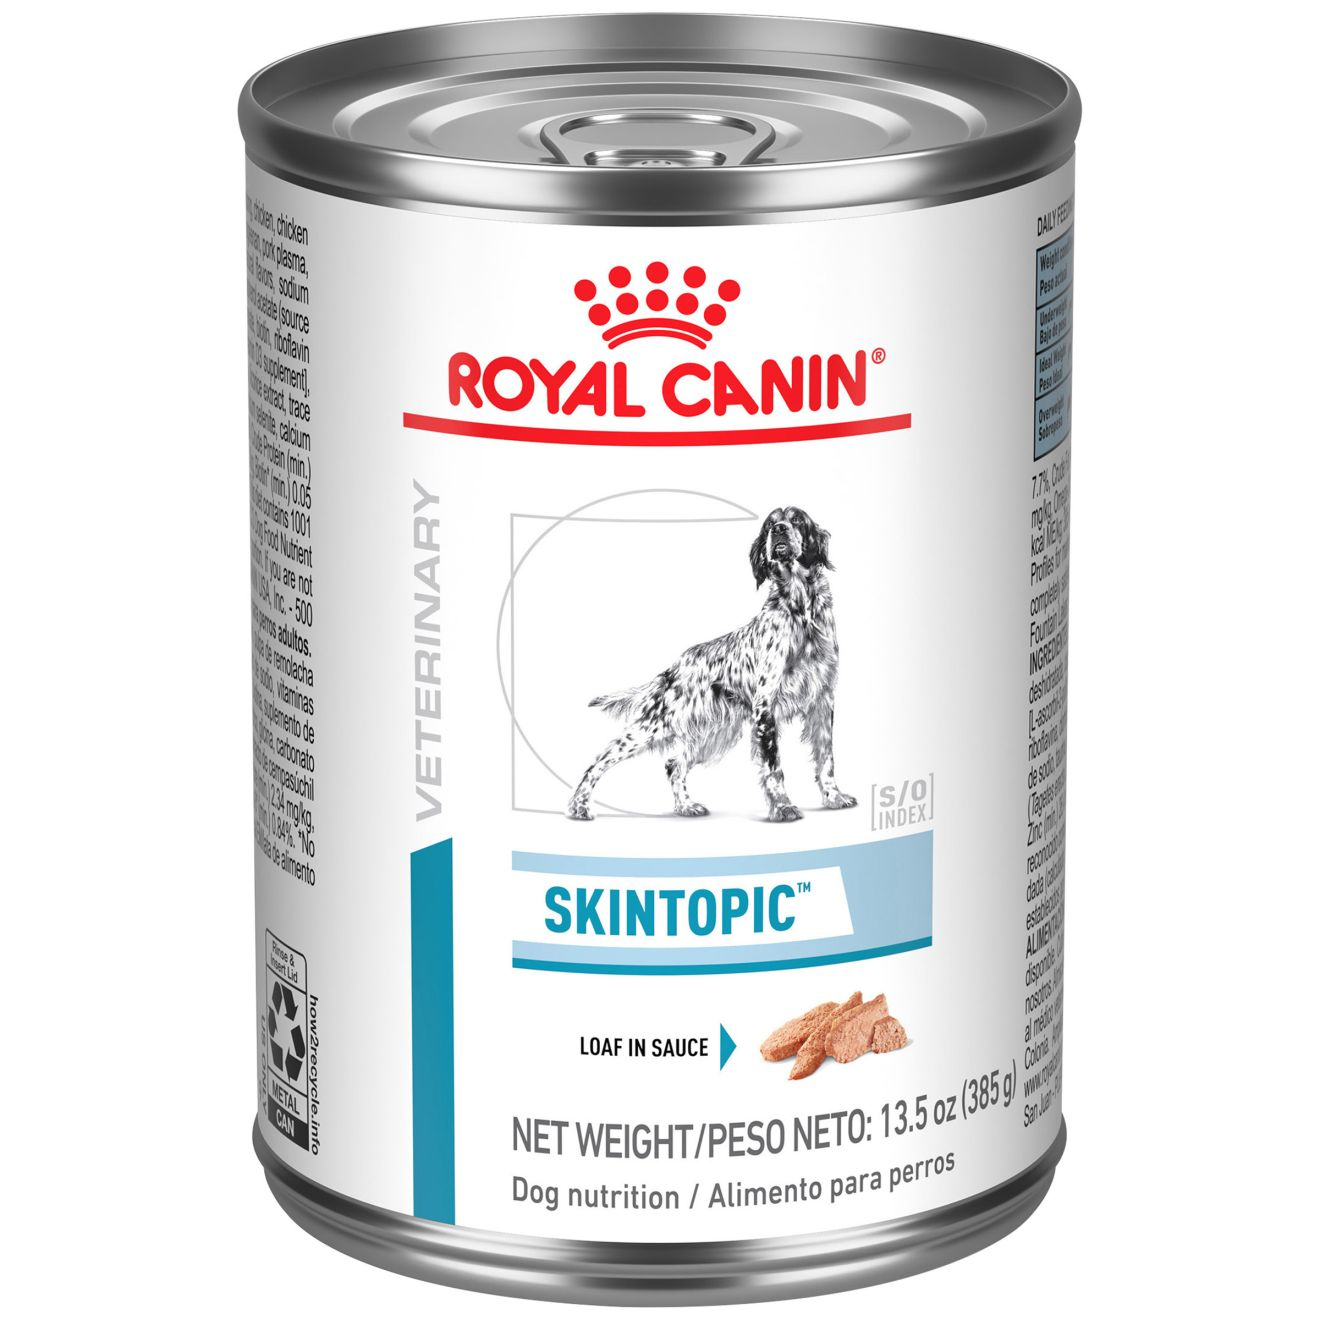 Royal Canin® Skintopic Adult Loaf in Sauce Canned Dog Food